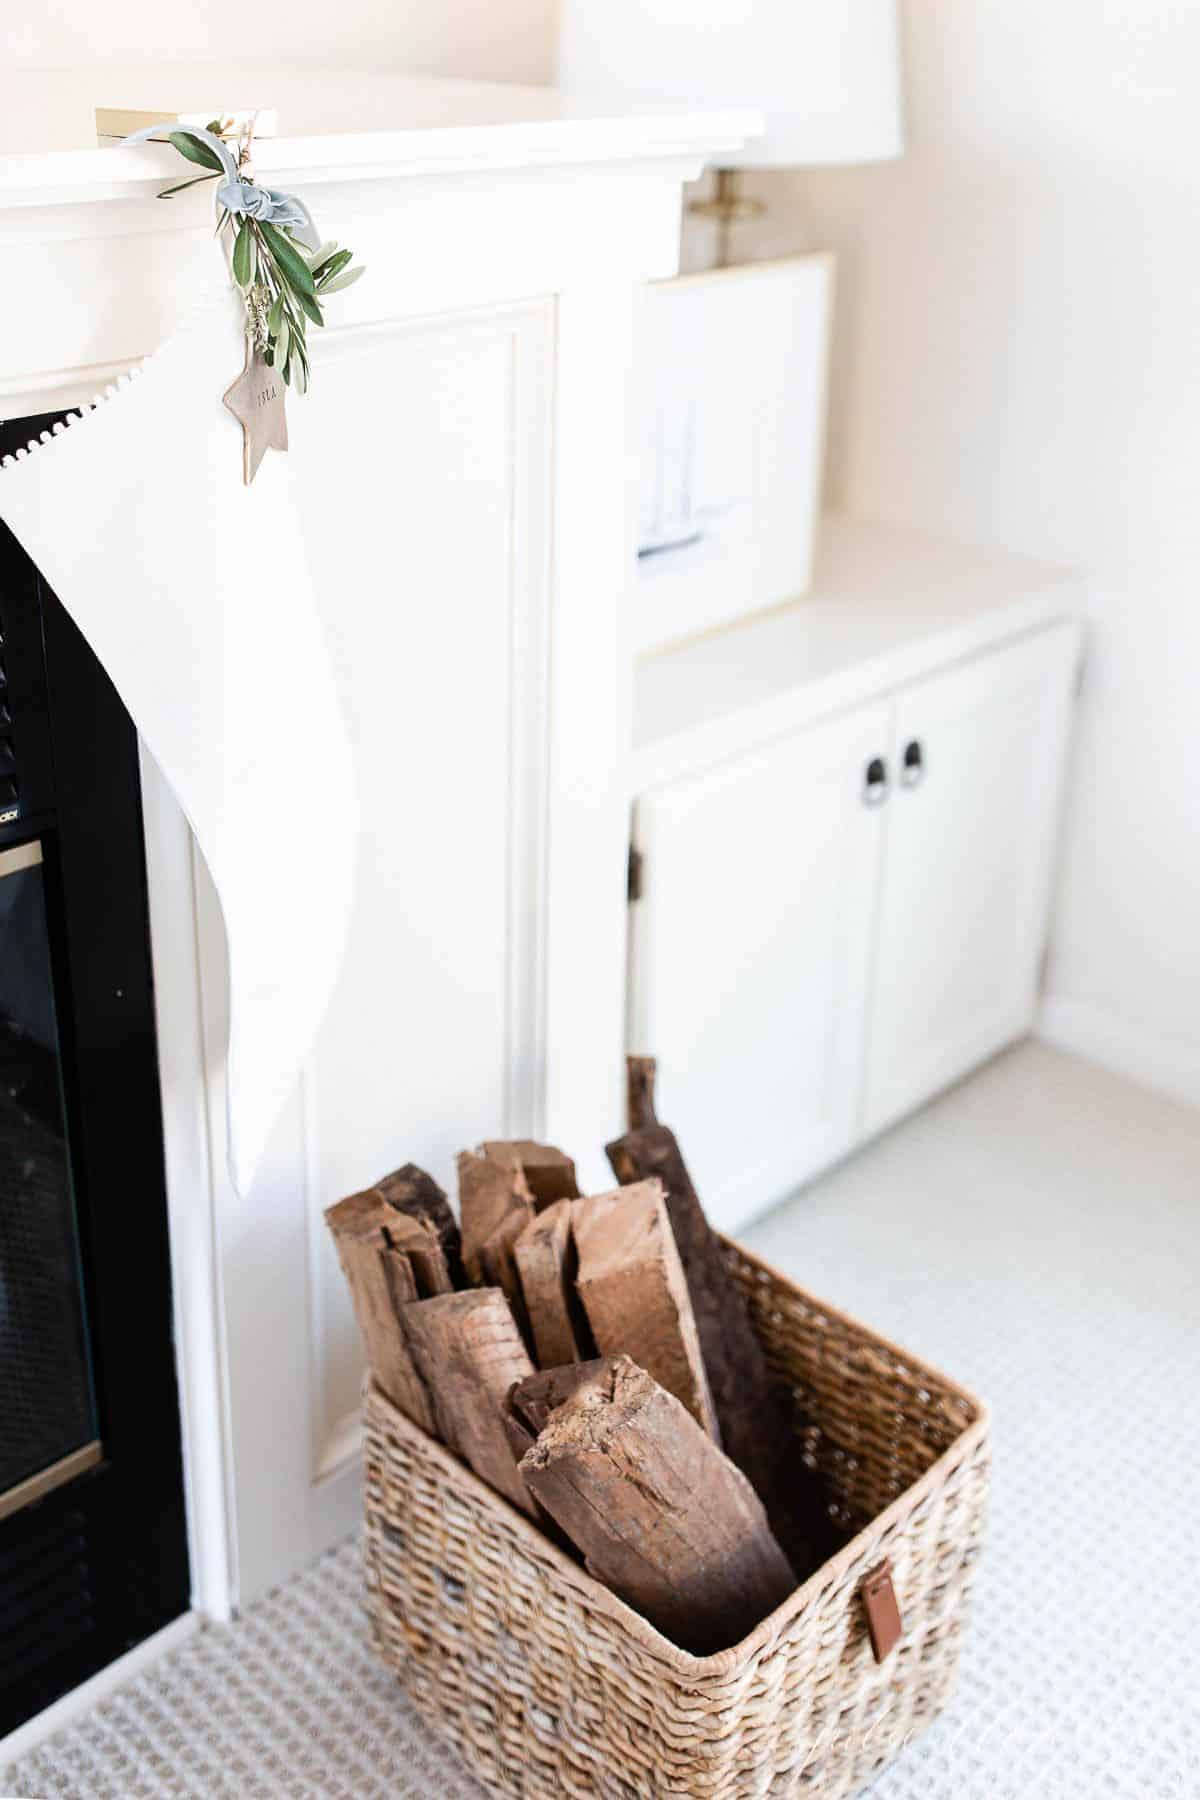 A white linen stocking hanging on a fireplace with a basket full of wood in front.